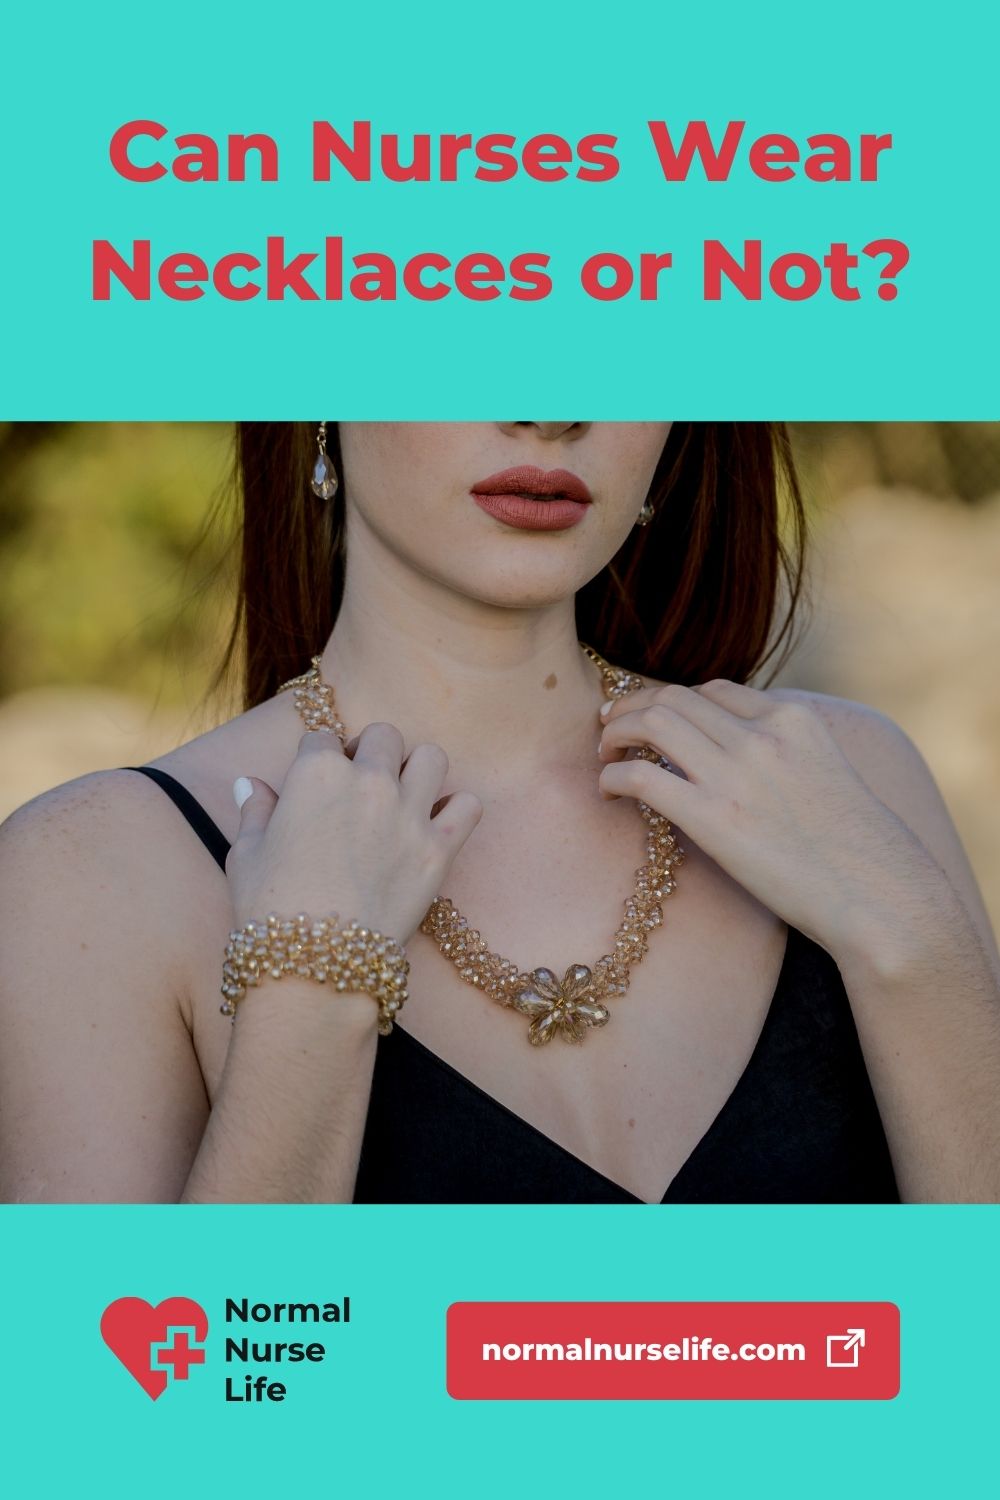 Can nurses wear necklaces or not